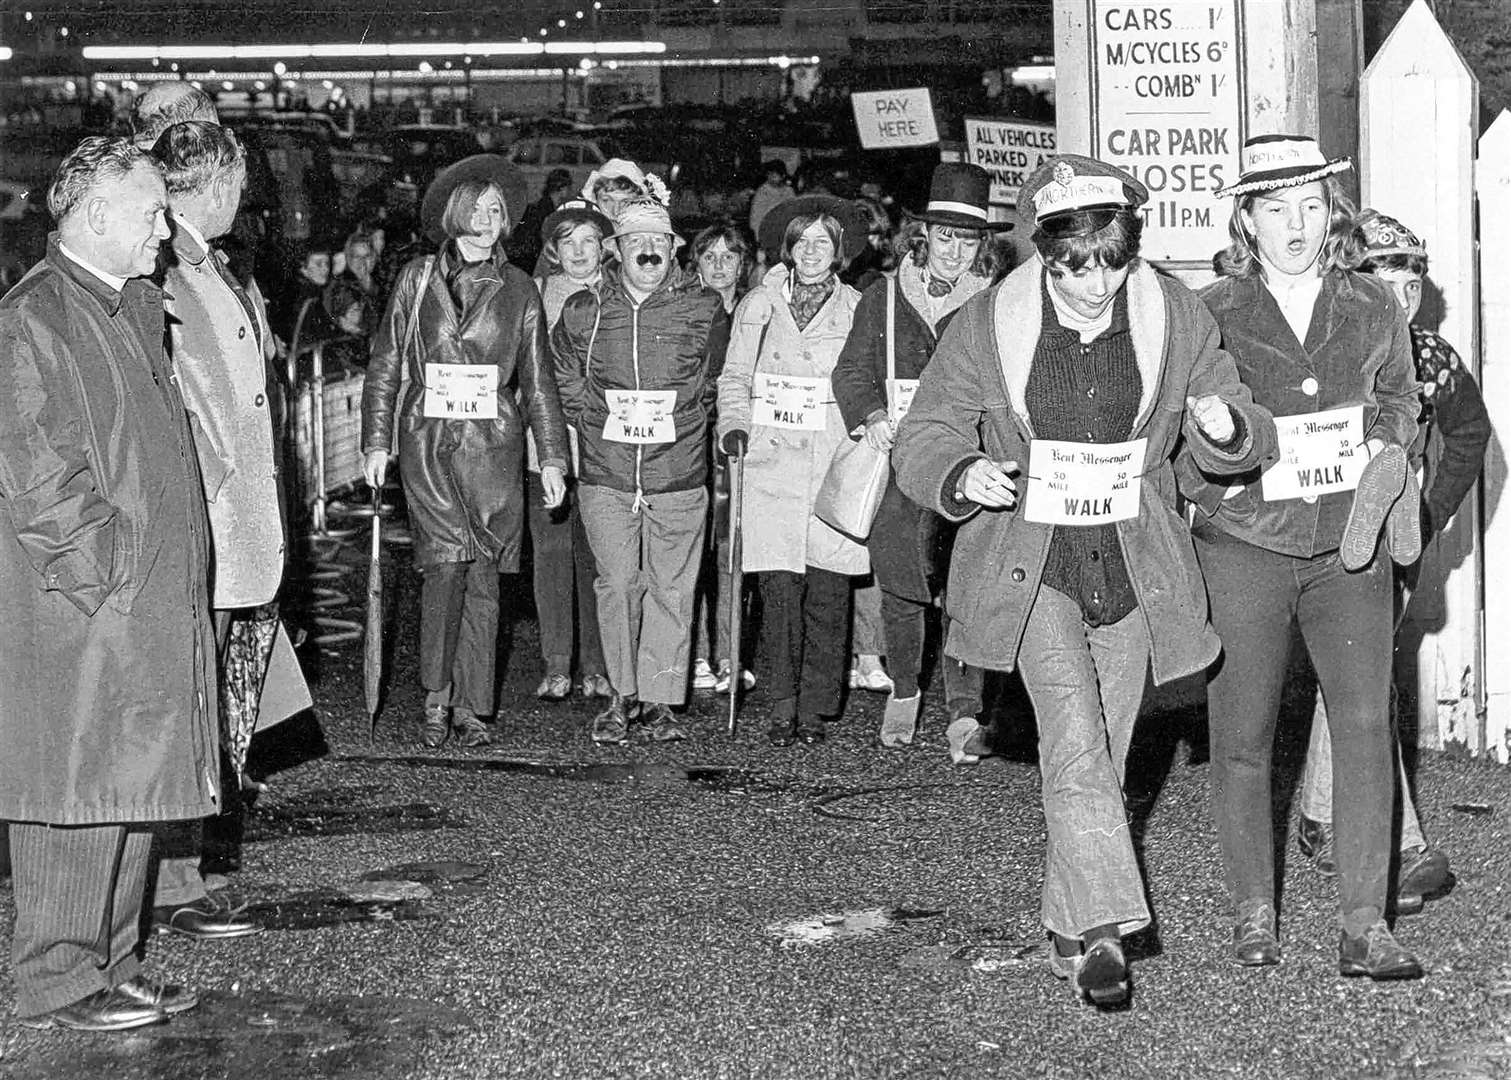 Many walkers took to wearing fancy dress as the Kent Messenger 50 mile walk grew in popularity in the 1960s. Picture from Images of Maidstone.